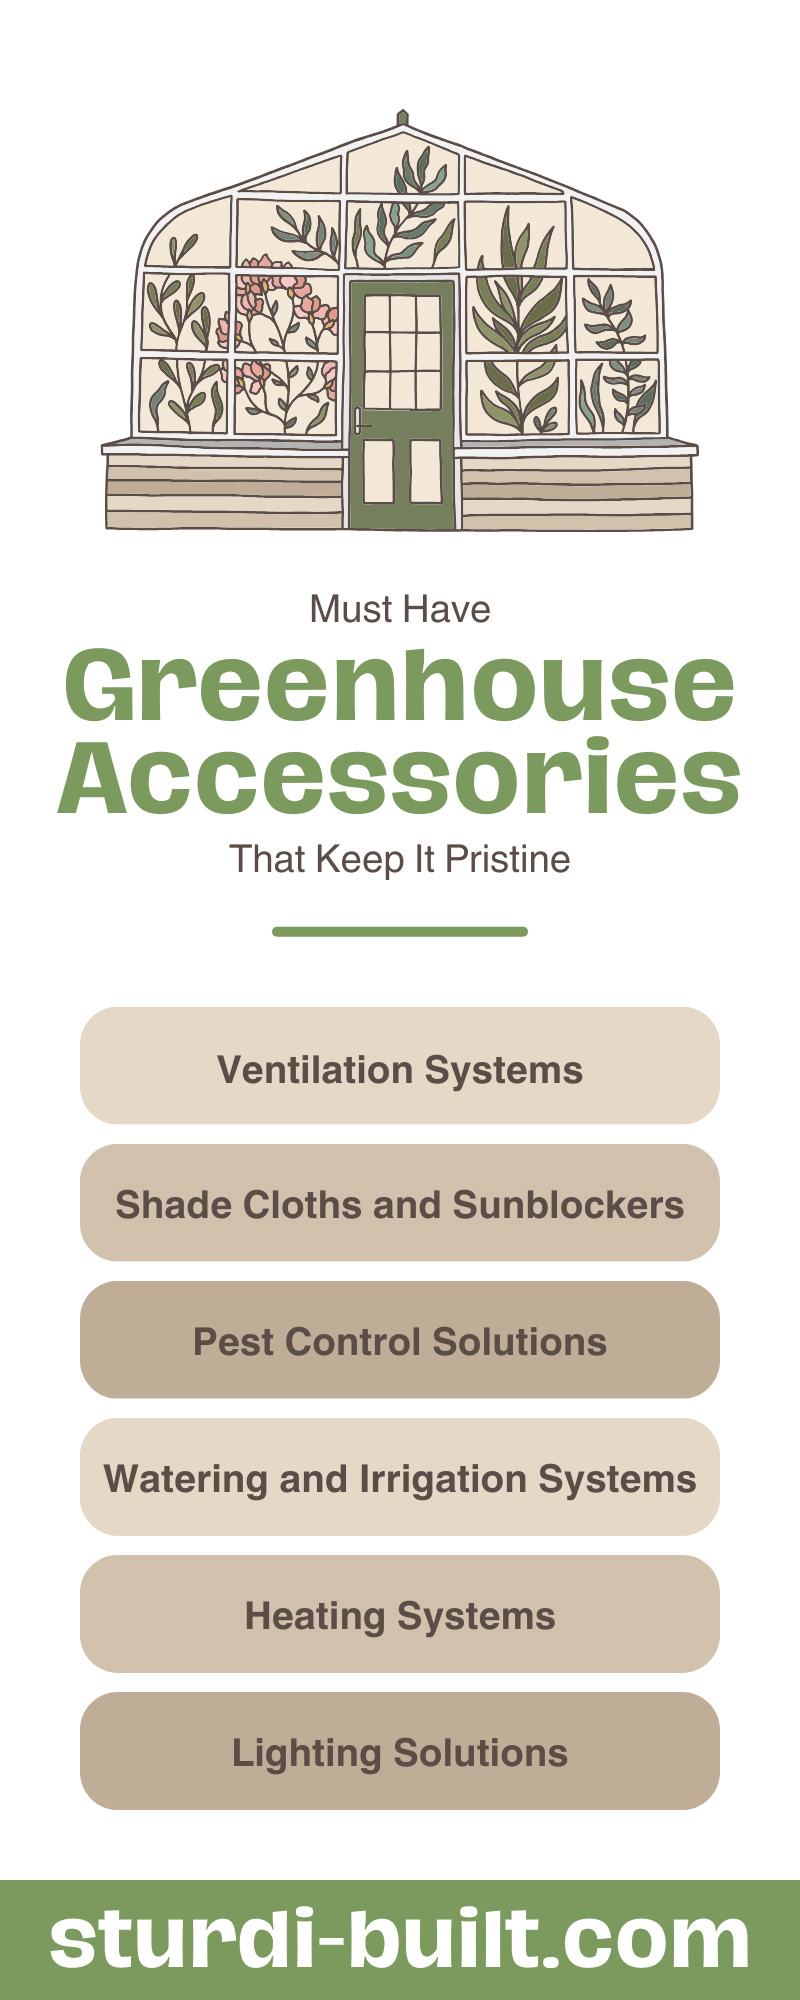 Must-Have Greenhouse Accessories That Keep It Pristine